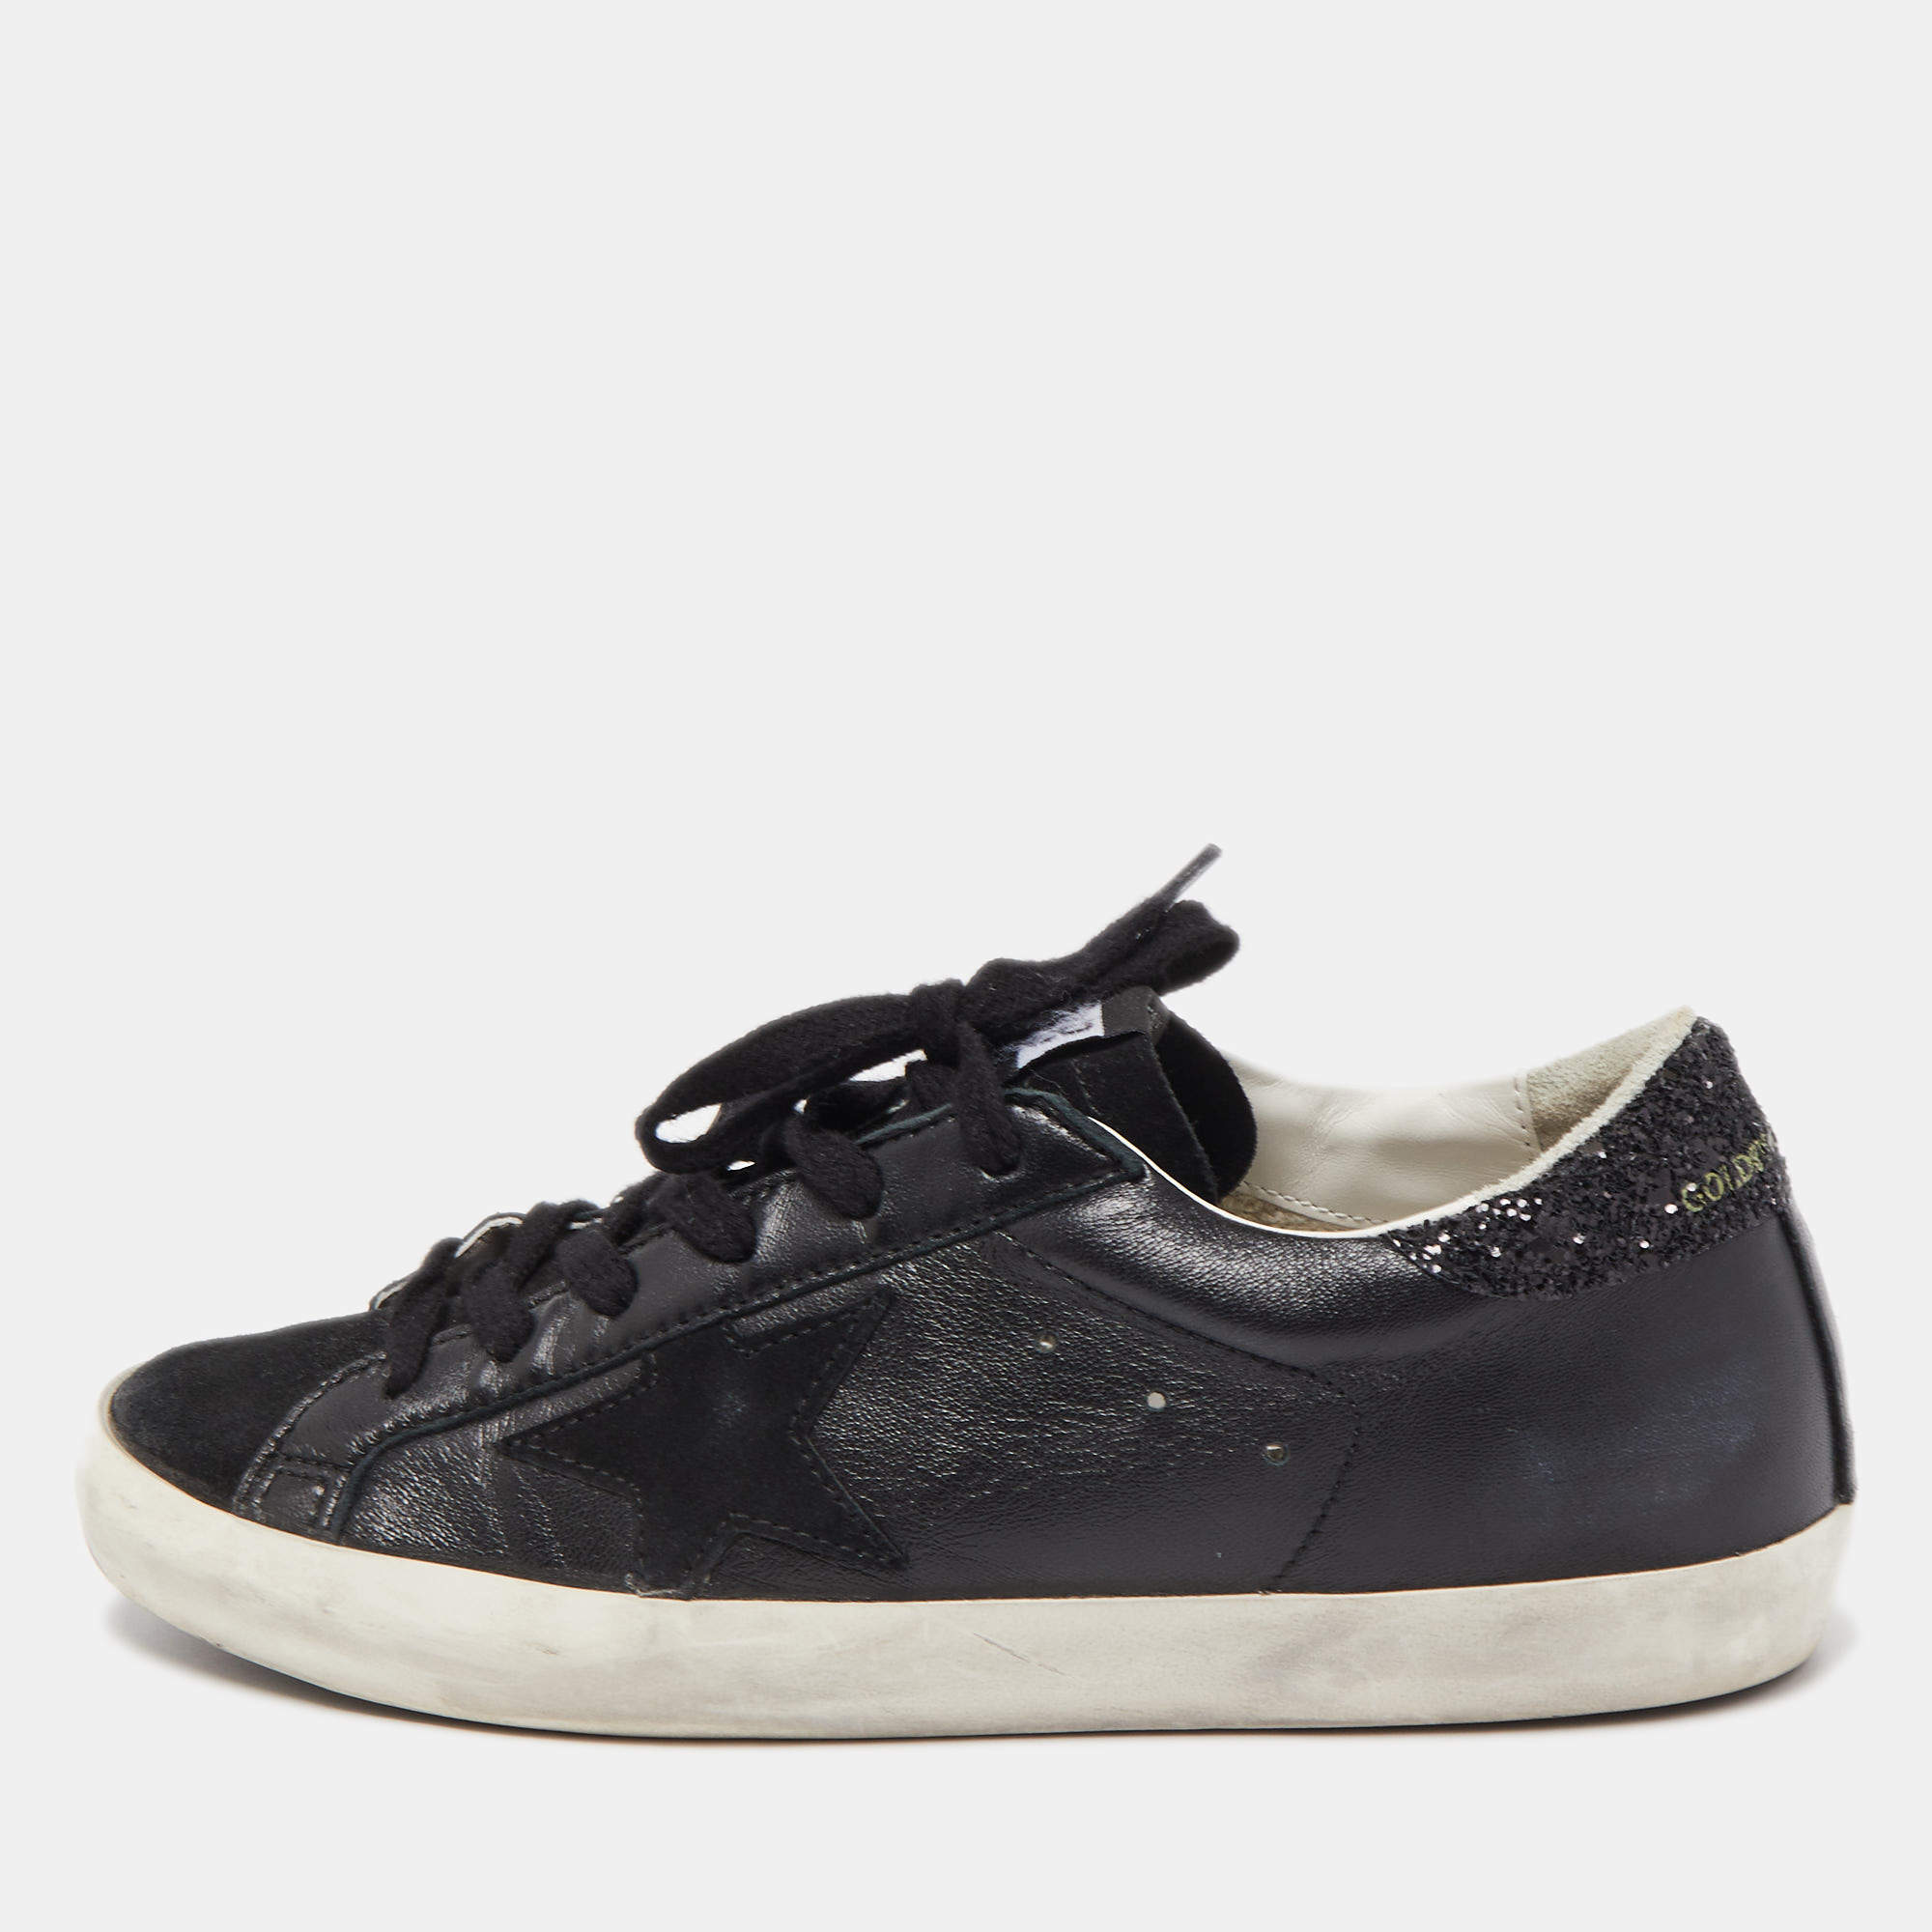 Golden Goose Black Leather and Suede Skate Superstar Sneakers Size 38